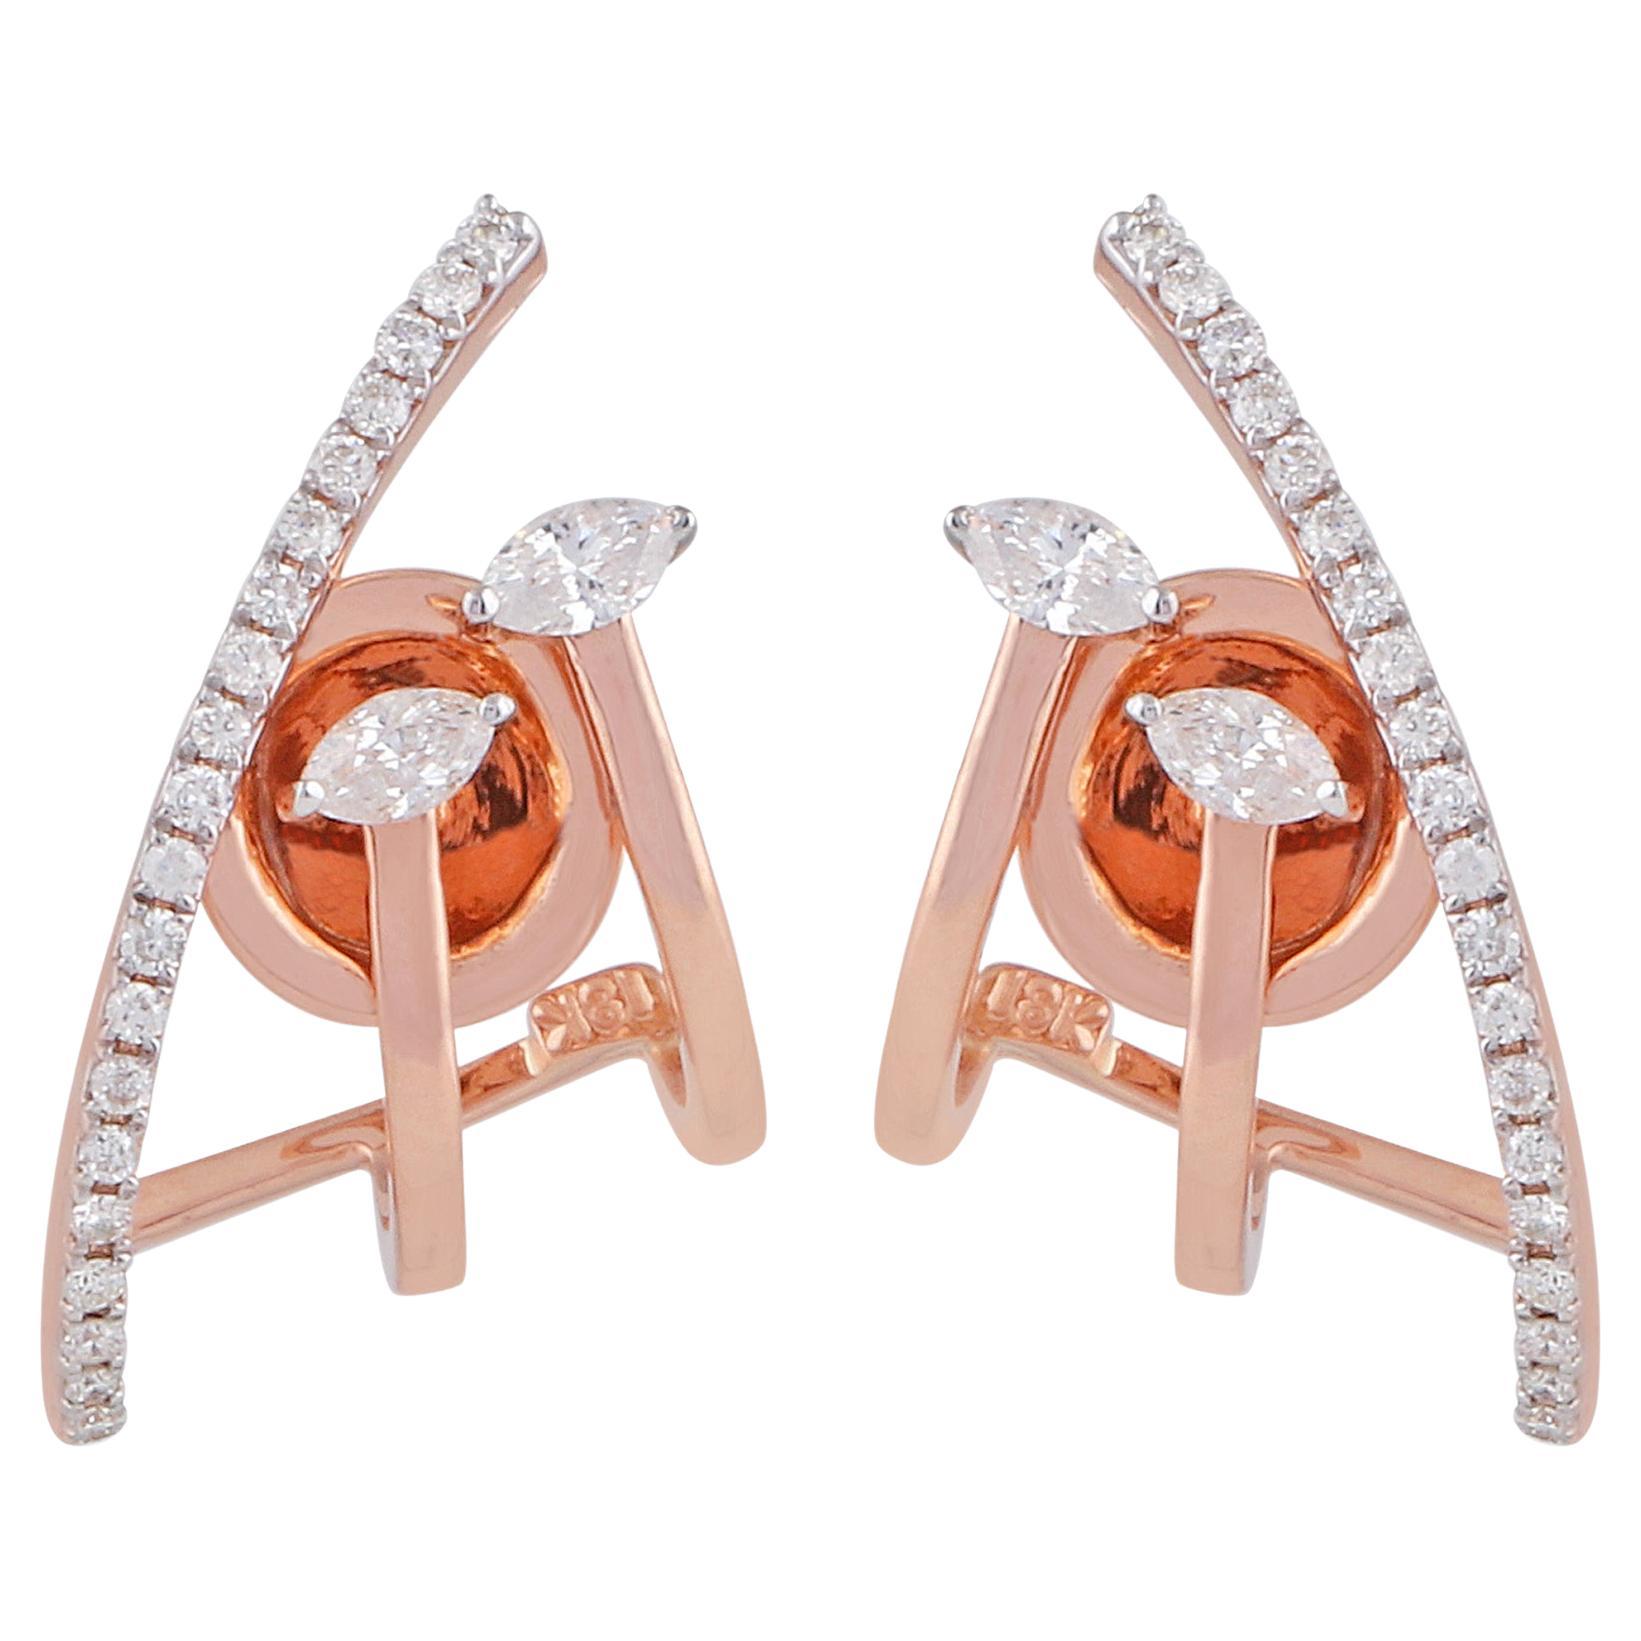 SI Clarity HI Color Marquise Diamond Earrings 18 Karat Rose Gold Fine Jewelry For Sale